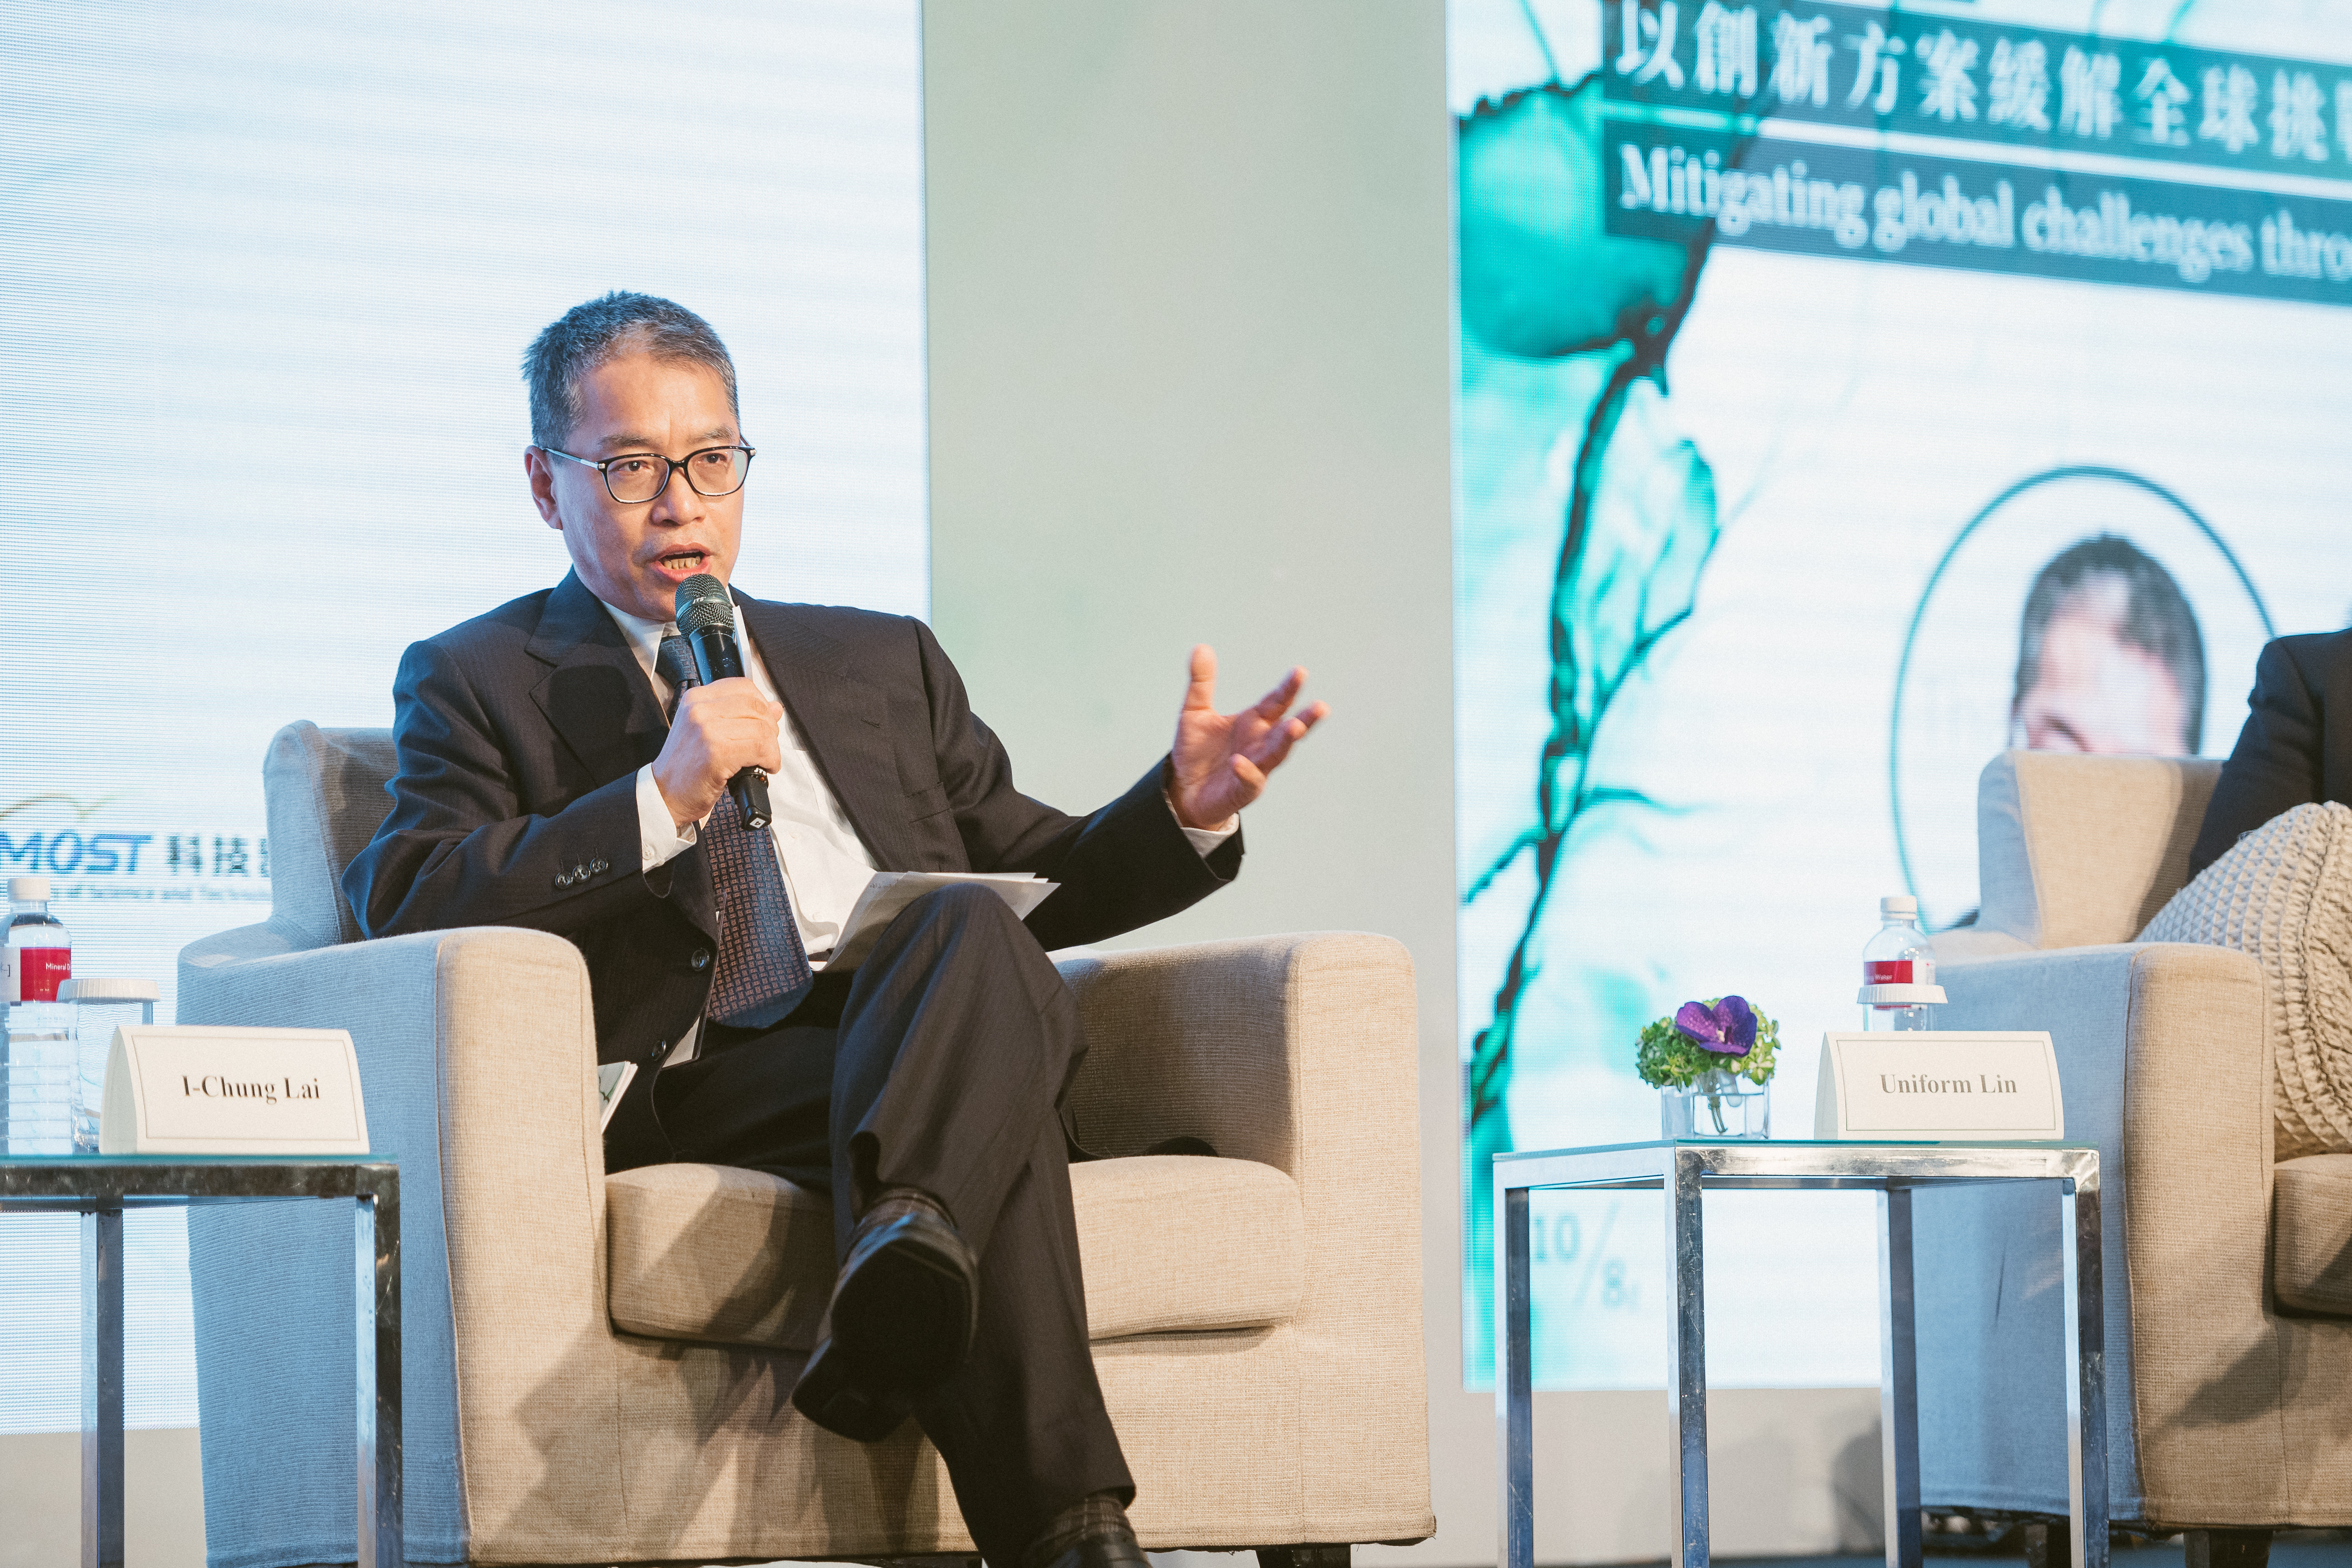 I-Chung Lai, President of the Prospect Foundation, as panelist